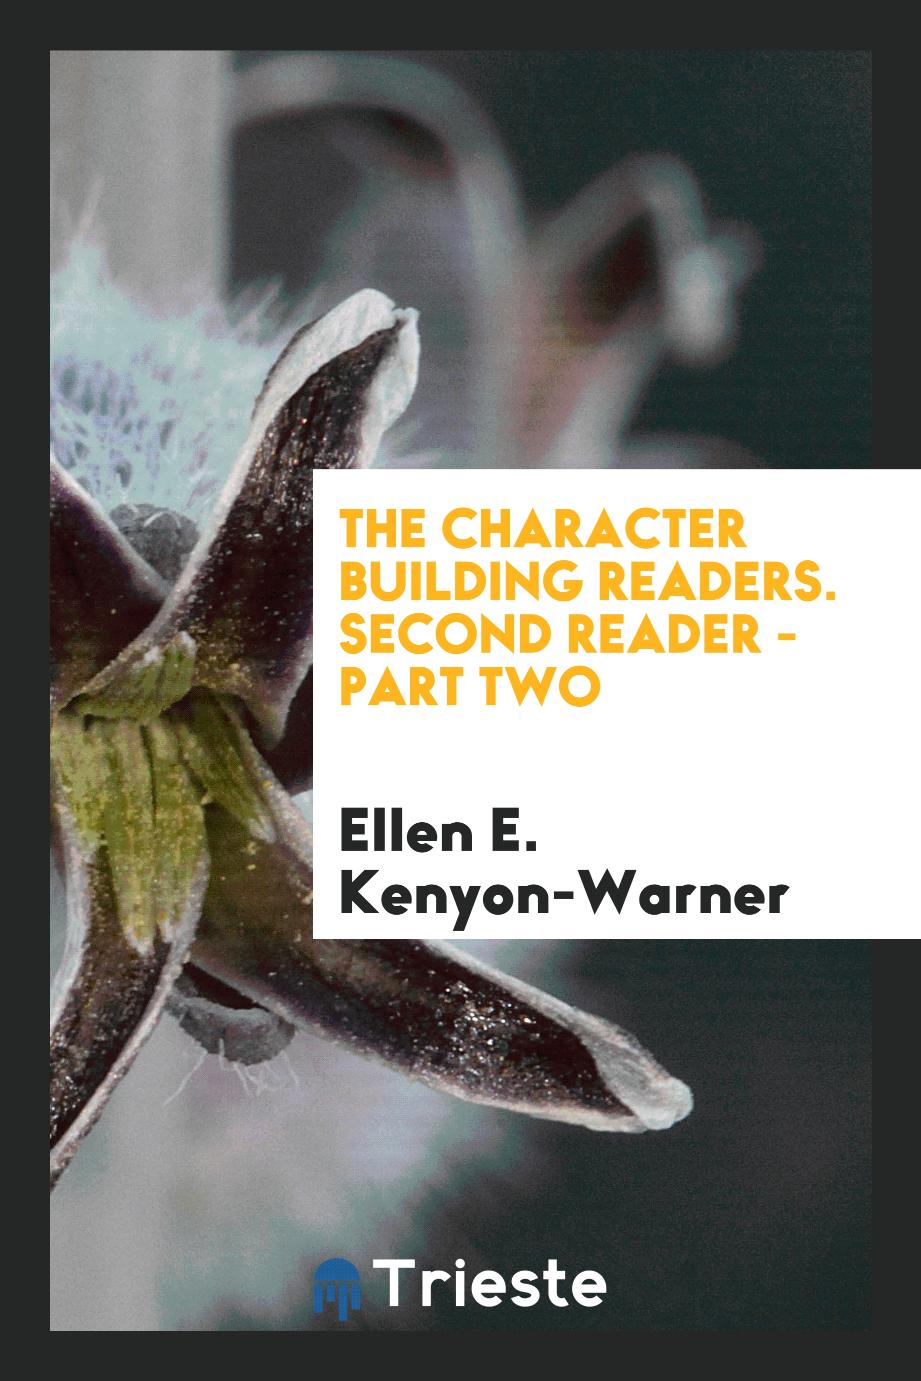 The Character Building Readers. Second Reader - Part Two